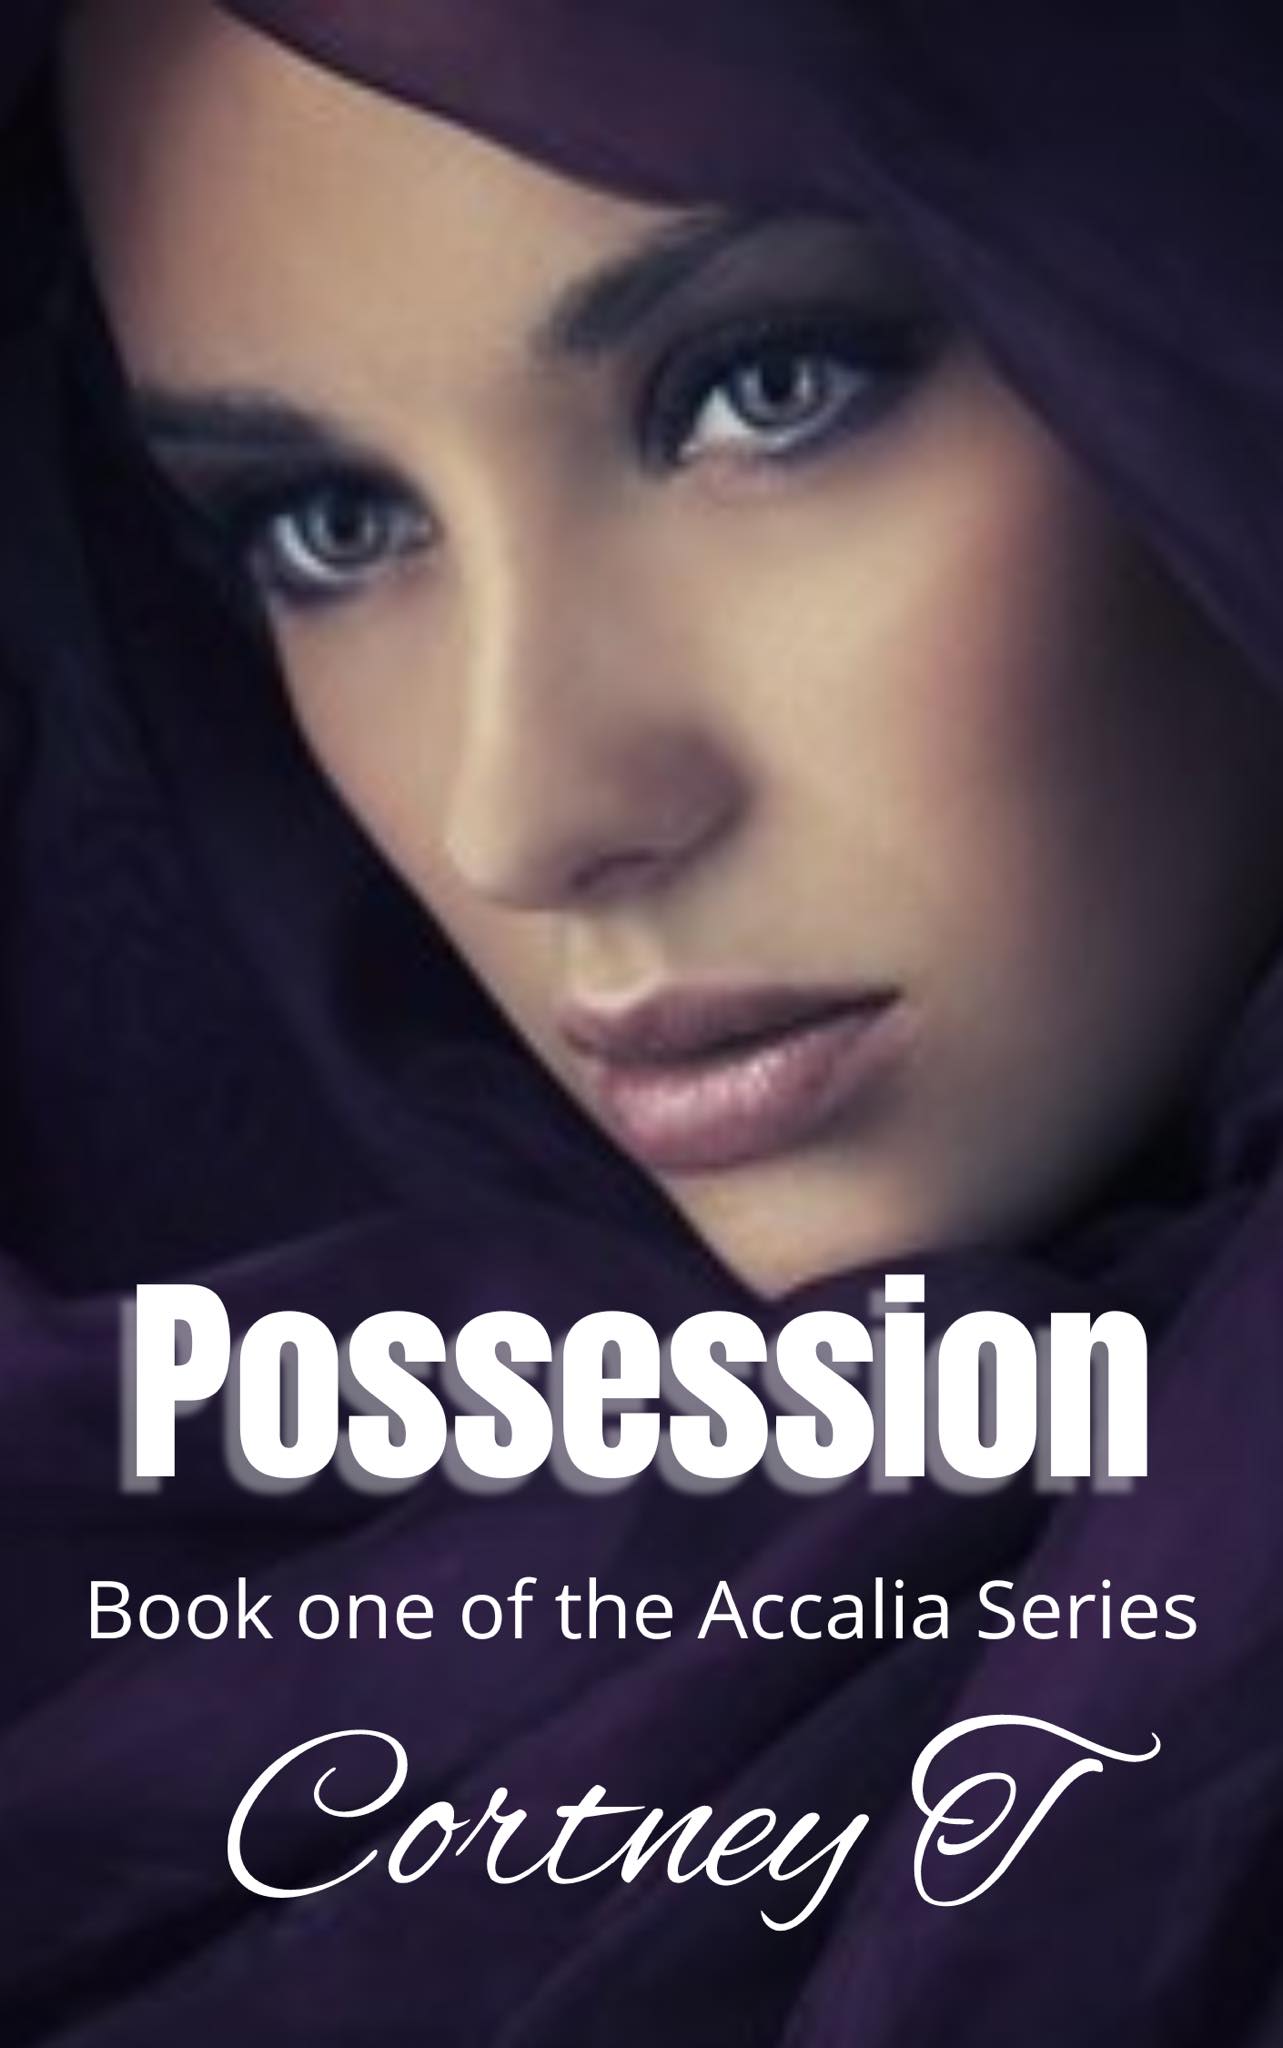 Possession,  Book one of the Accalia Series  By Cortney T  | Libri